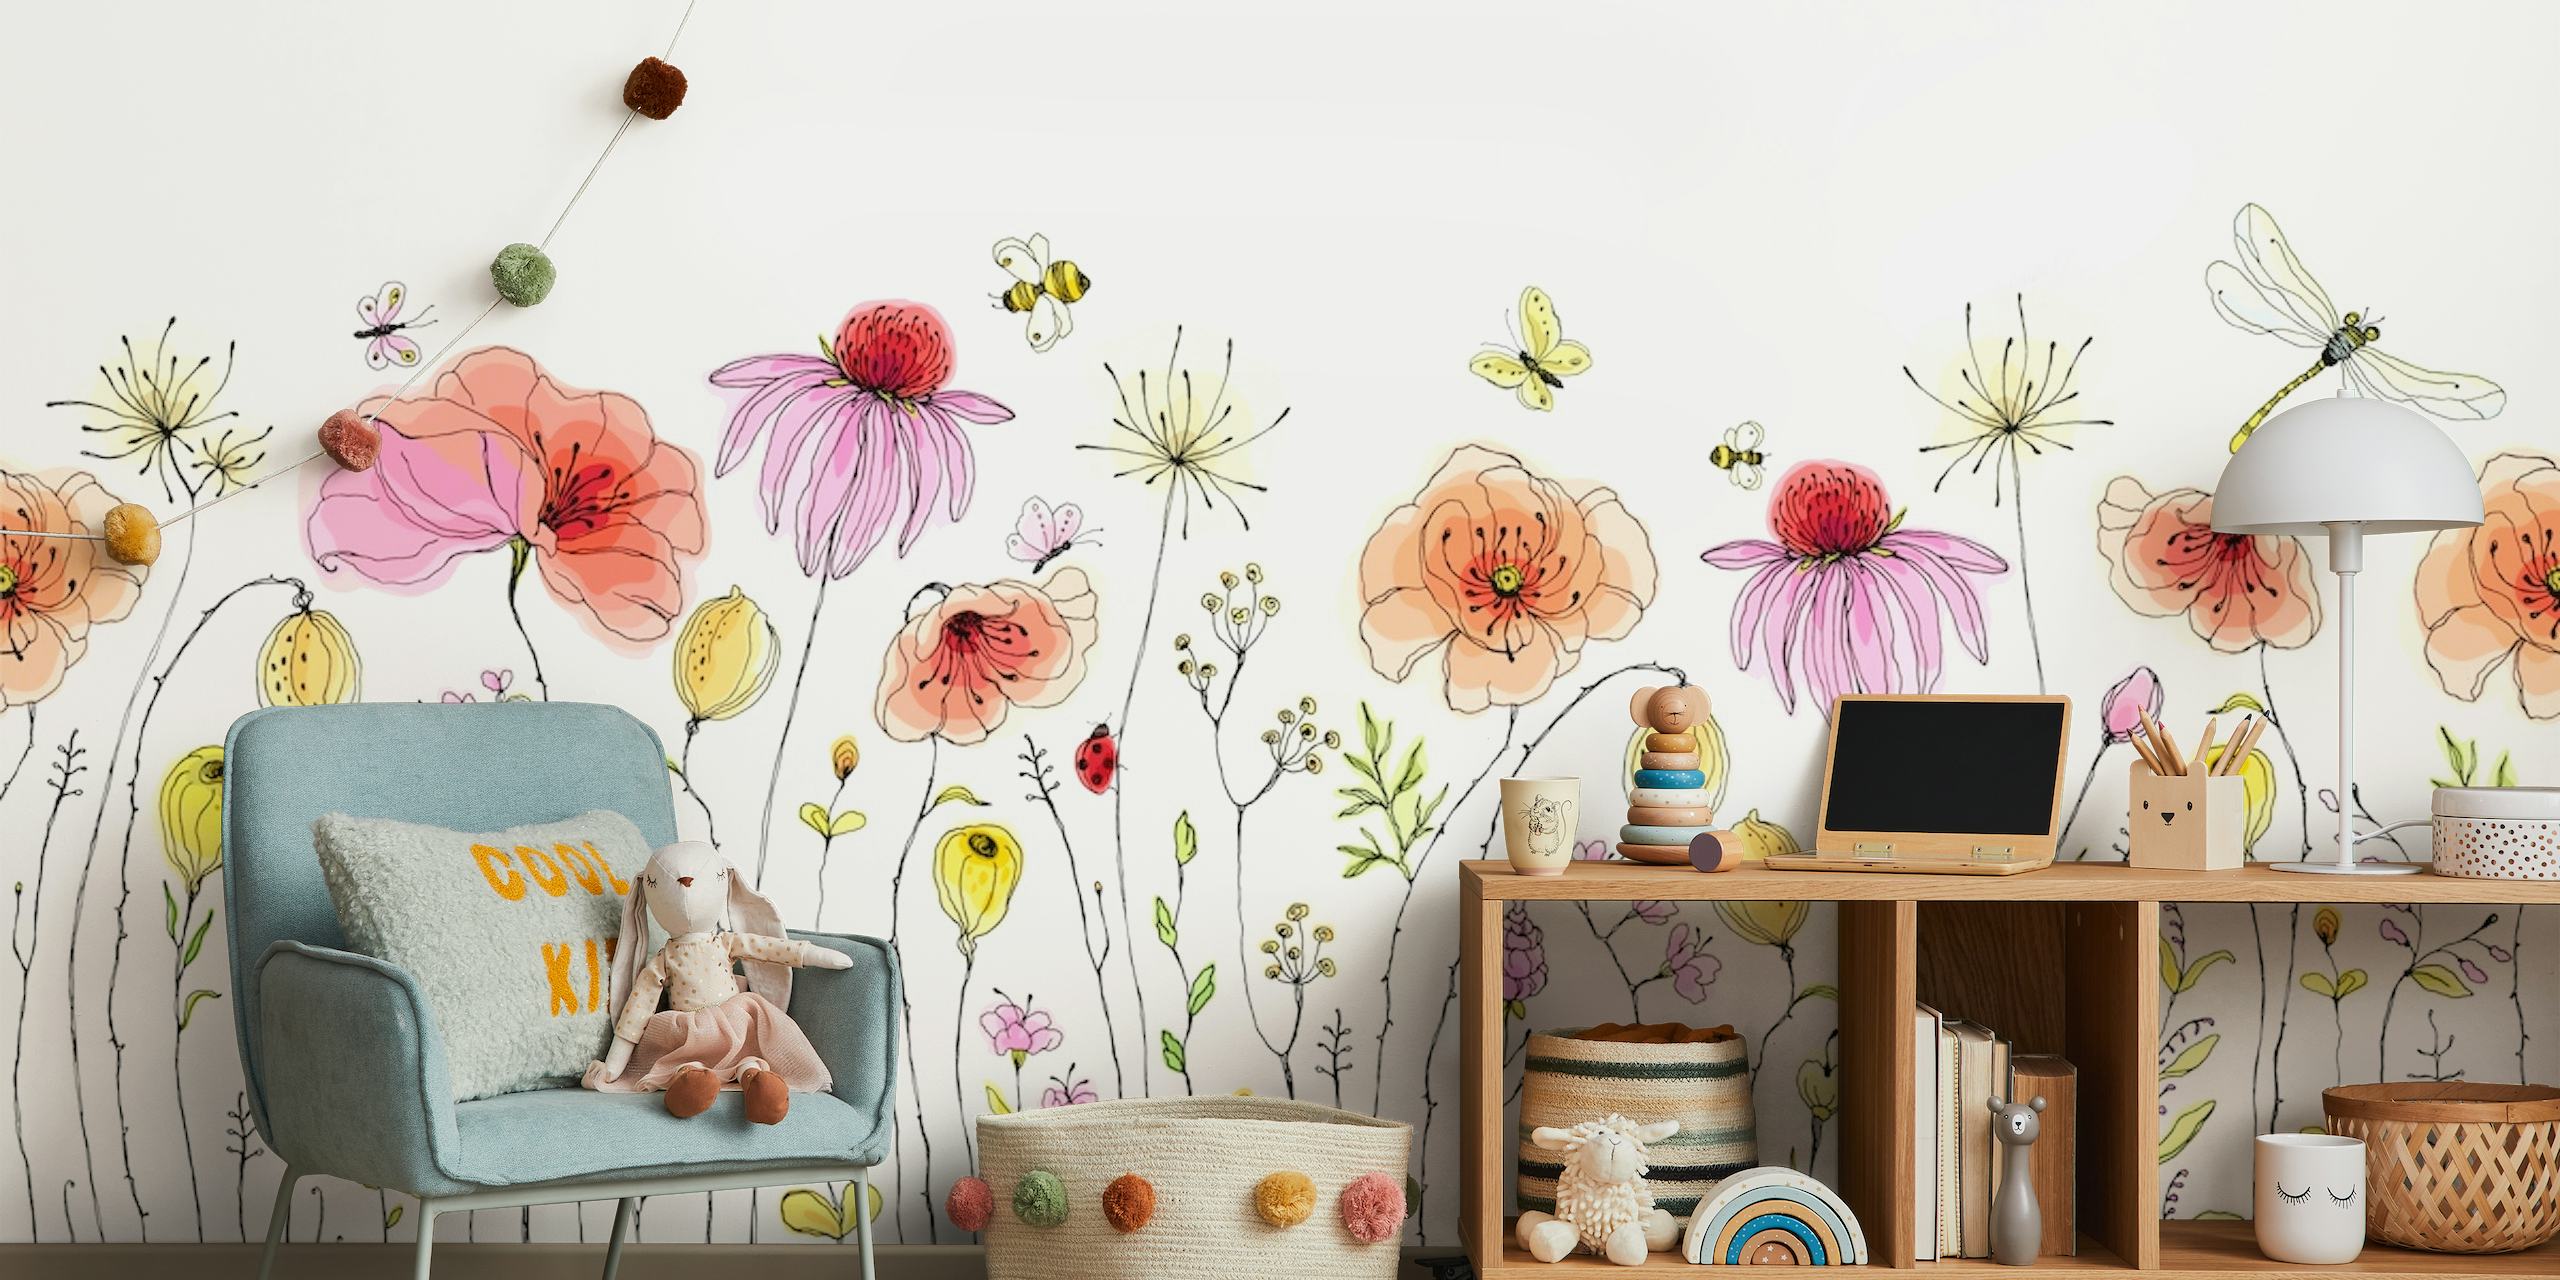 Elegant summer flower field wall mural with pastel-colored blooms and a whimsical dragonfly